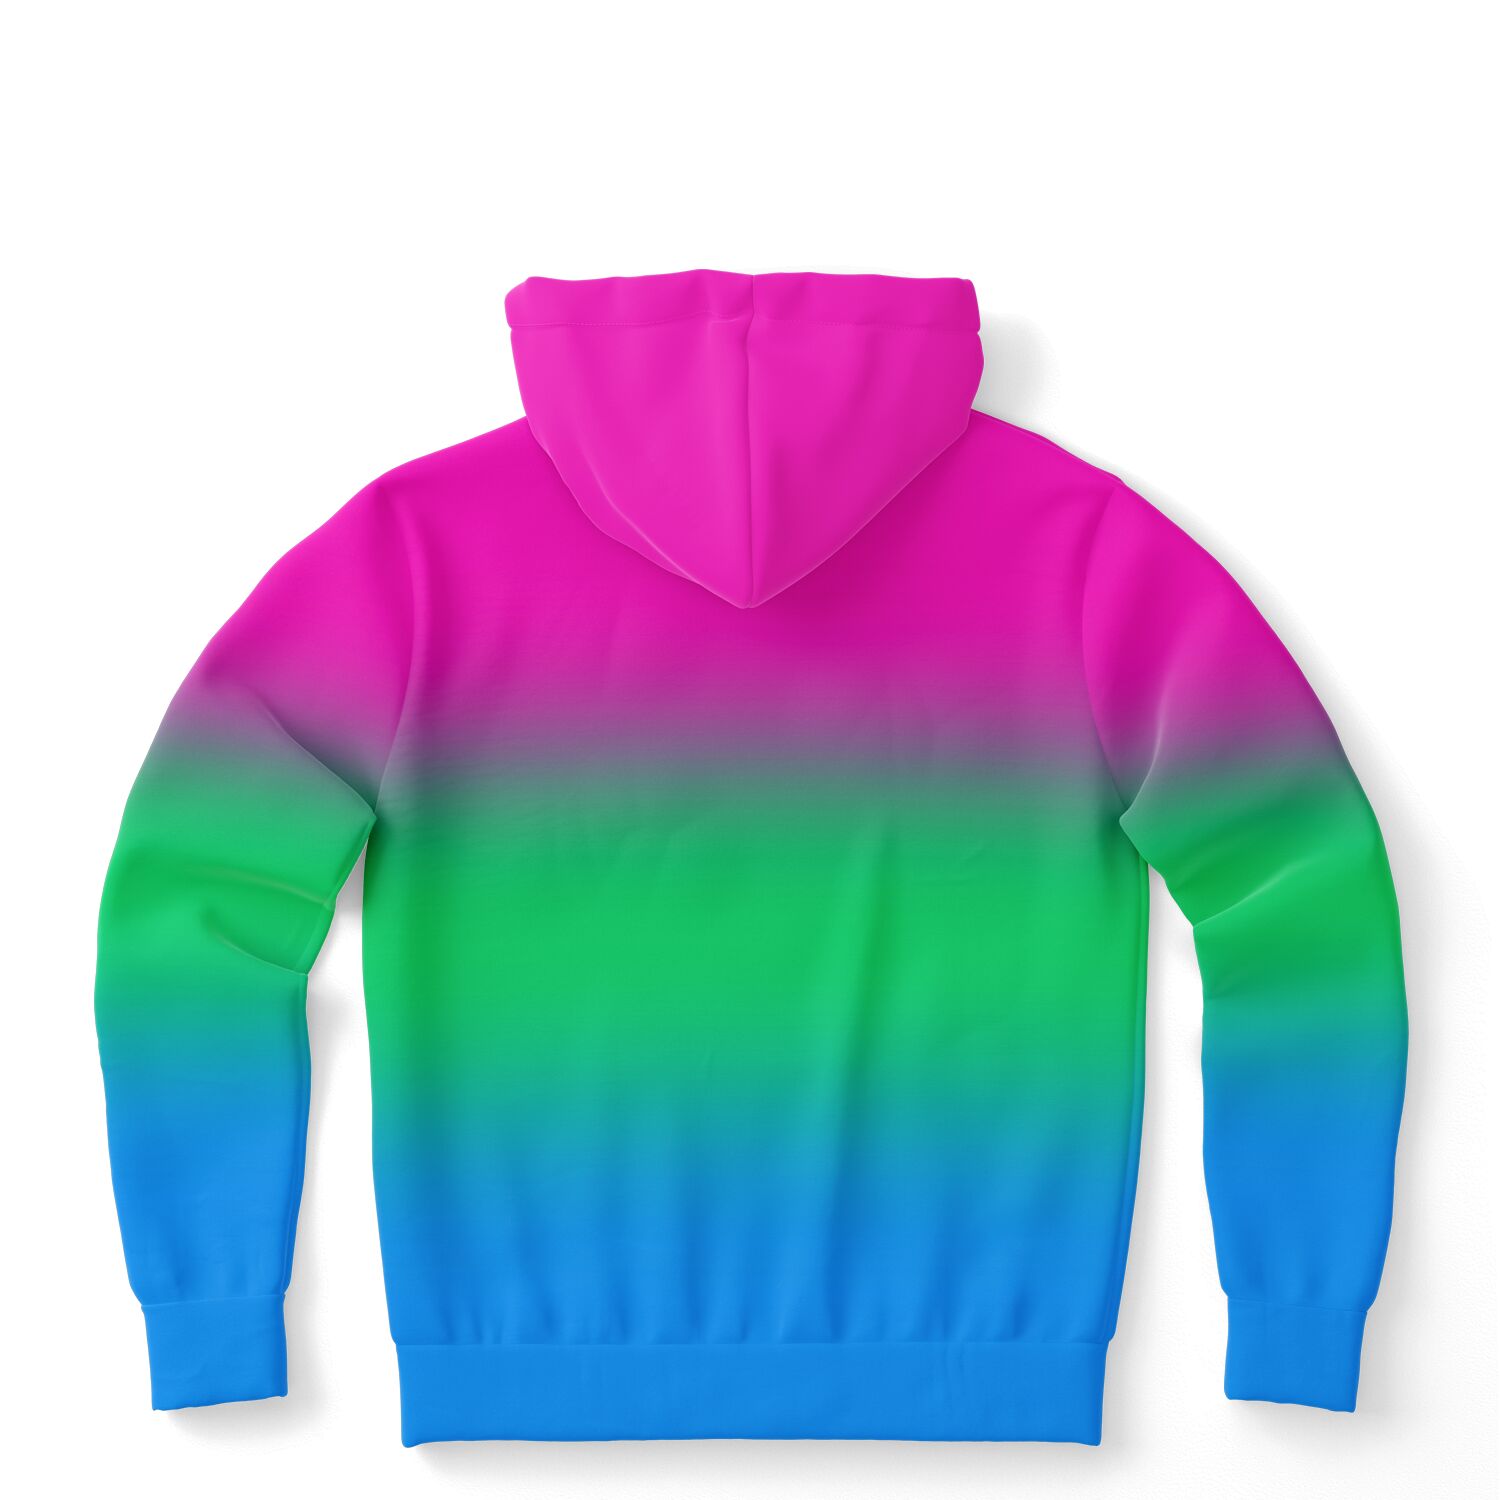 Polysexual Pride Ombre Pullover Hoodie Fashion Hoodie - AOP PRIDE MODE